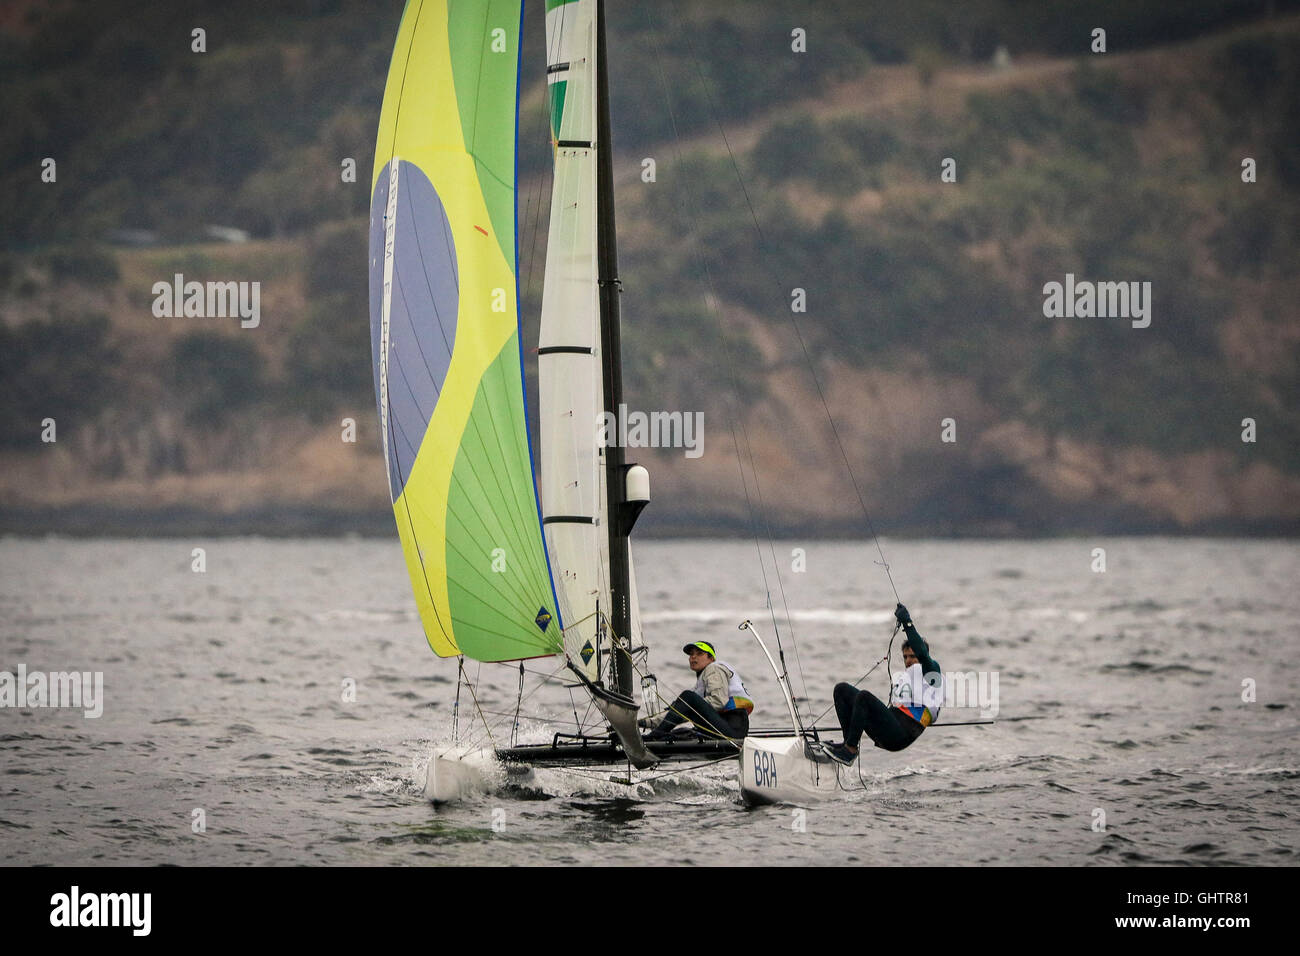 Rio De Janeiro, Brazil. 10th August, 2016. 2016 SAILING OLYMPICS - Samuel Albrecht and Isabel Swan (BRA) during the candle Rio Olympics 2016 held at Marina da Glória, in Guanabara Bay. Credit:  Foto Arena LTDA/Alamy Live News Stock Photo